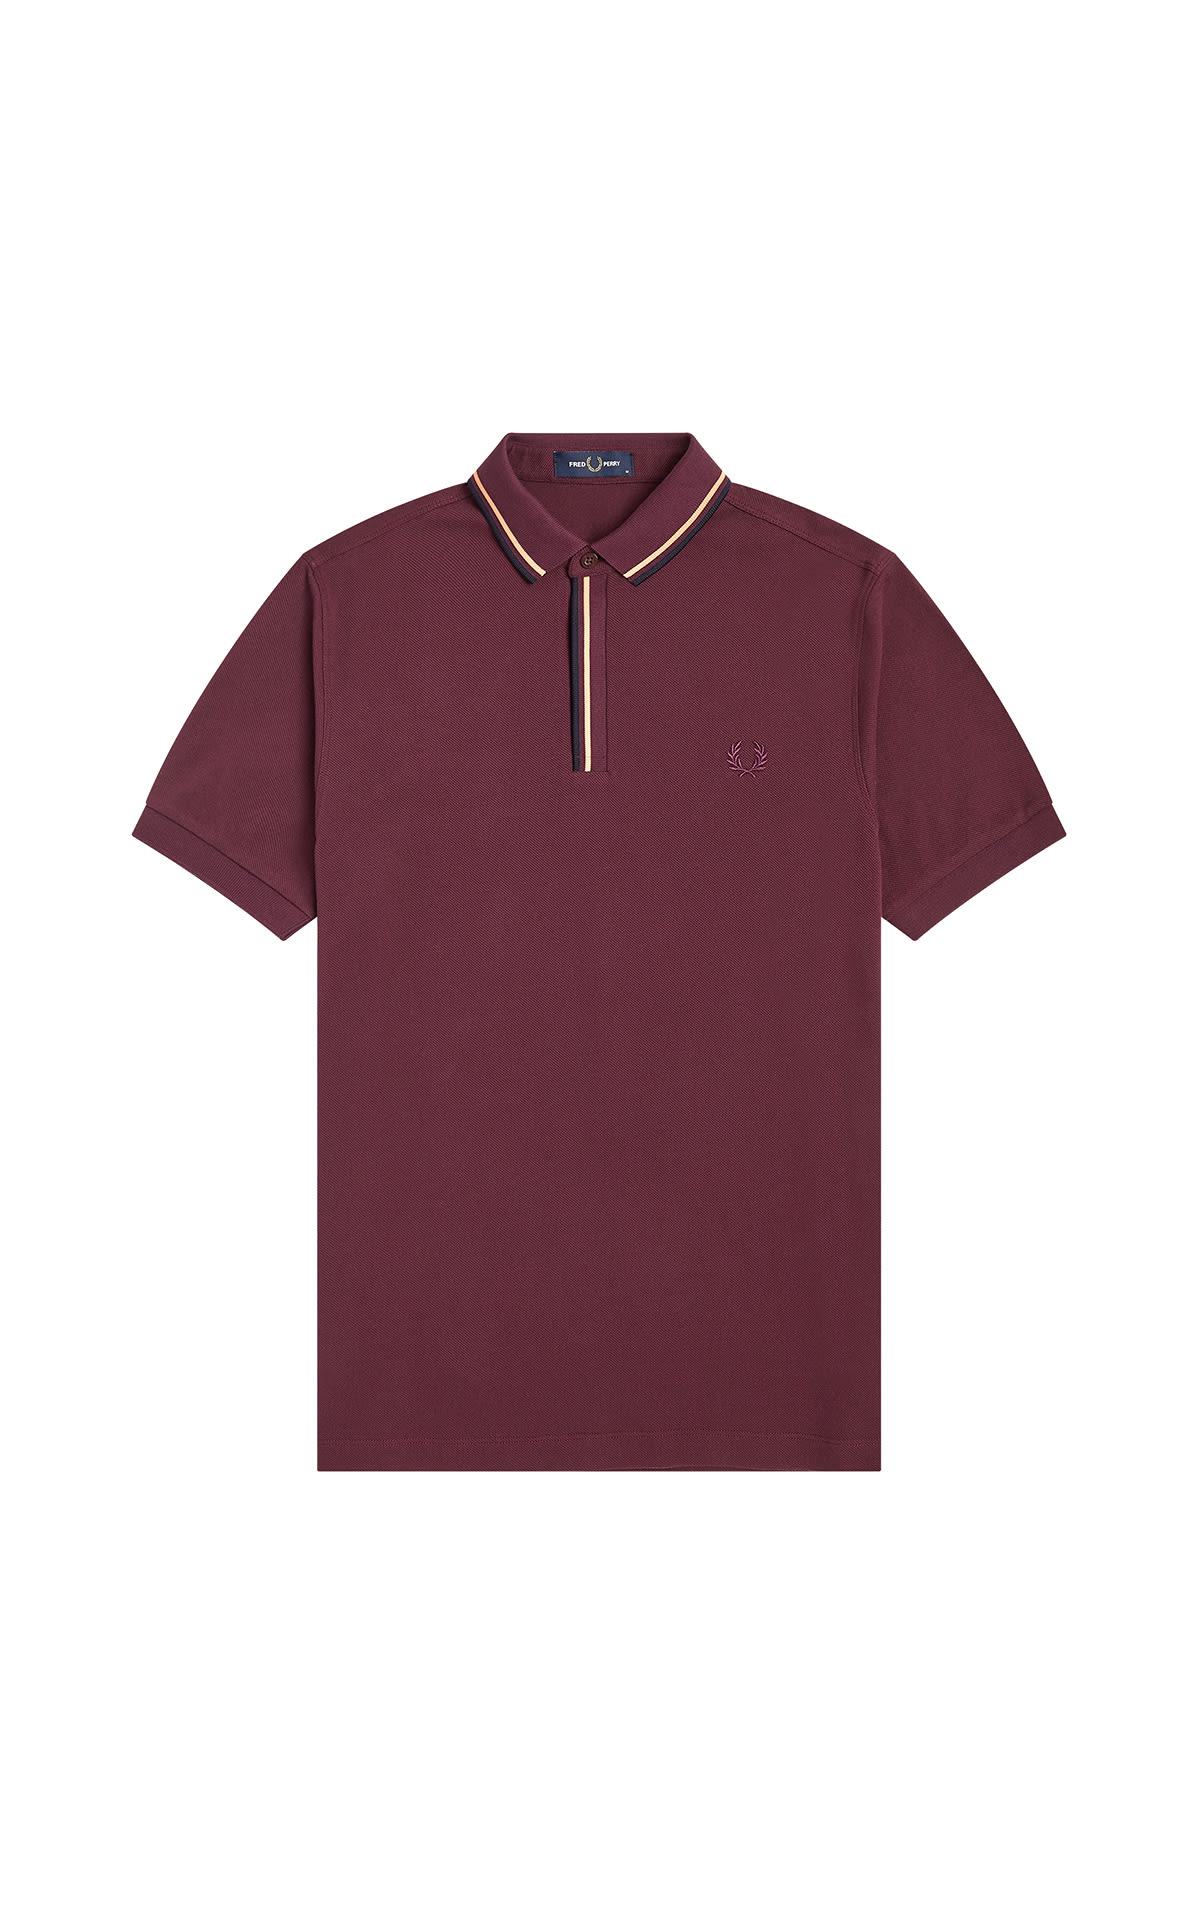 La Vallée Village Fred Perry tipped placket burgundy polo shirt 